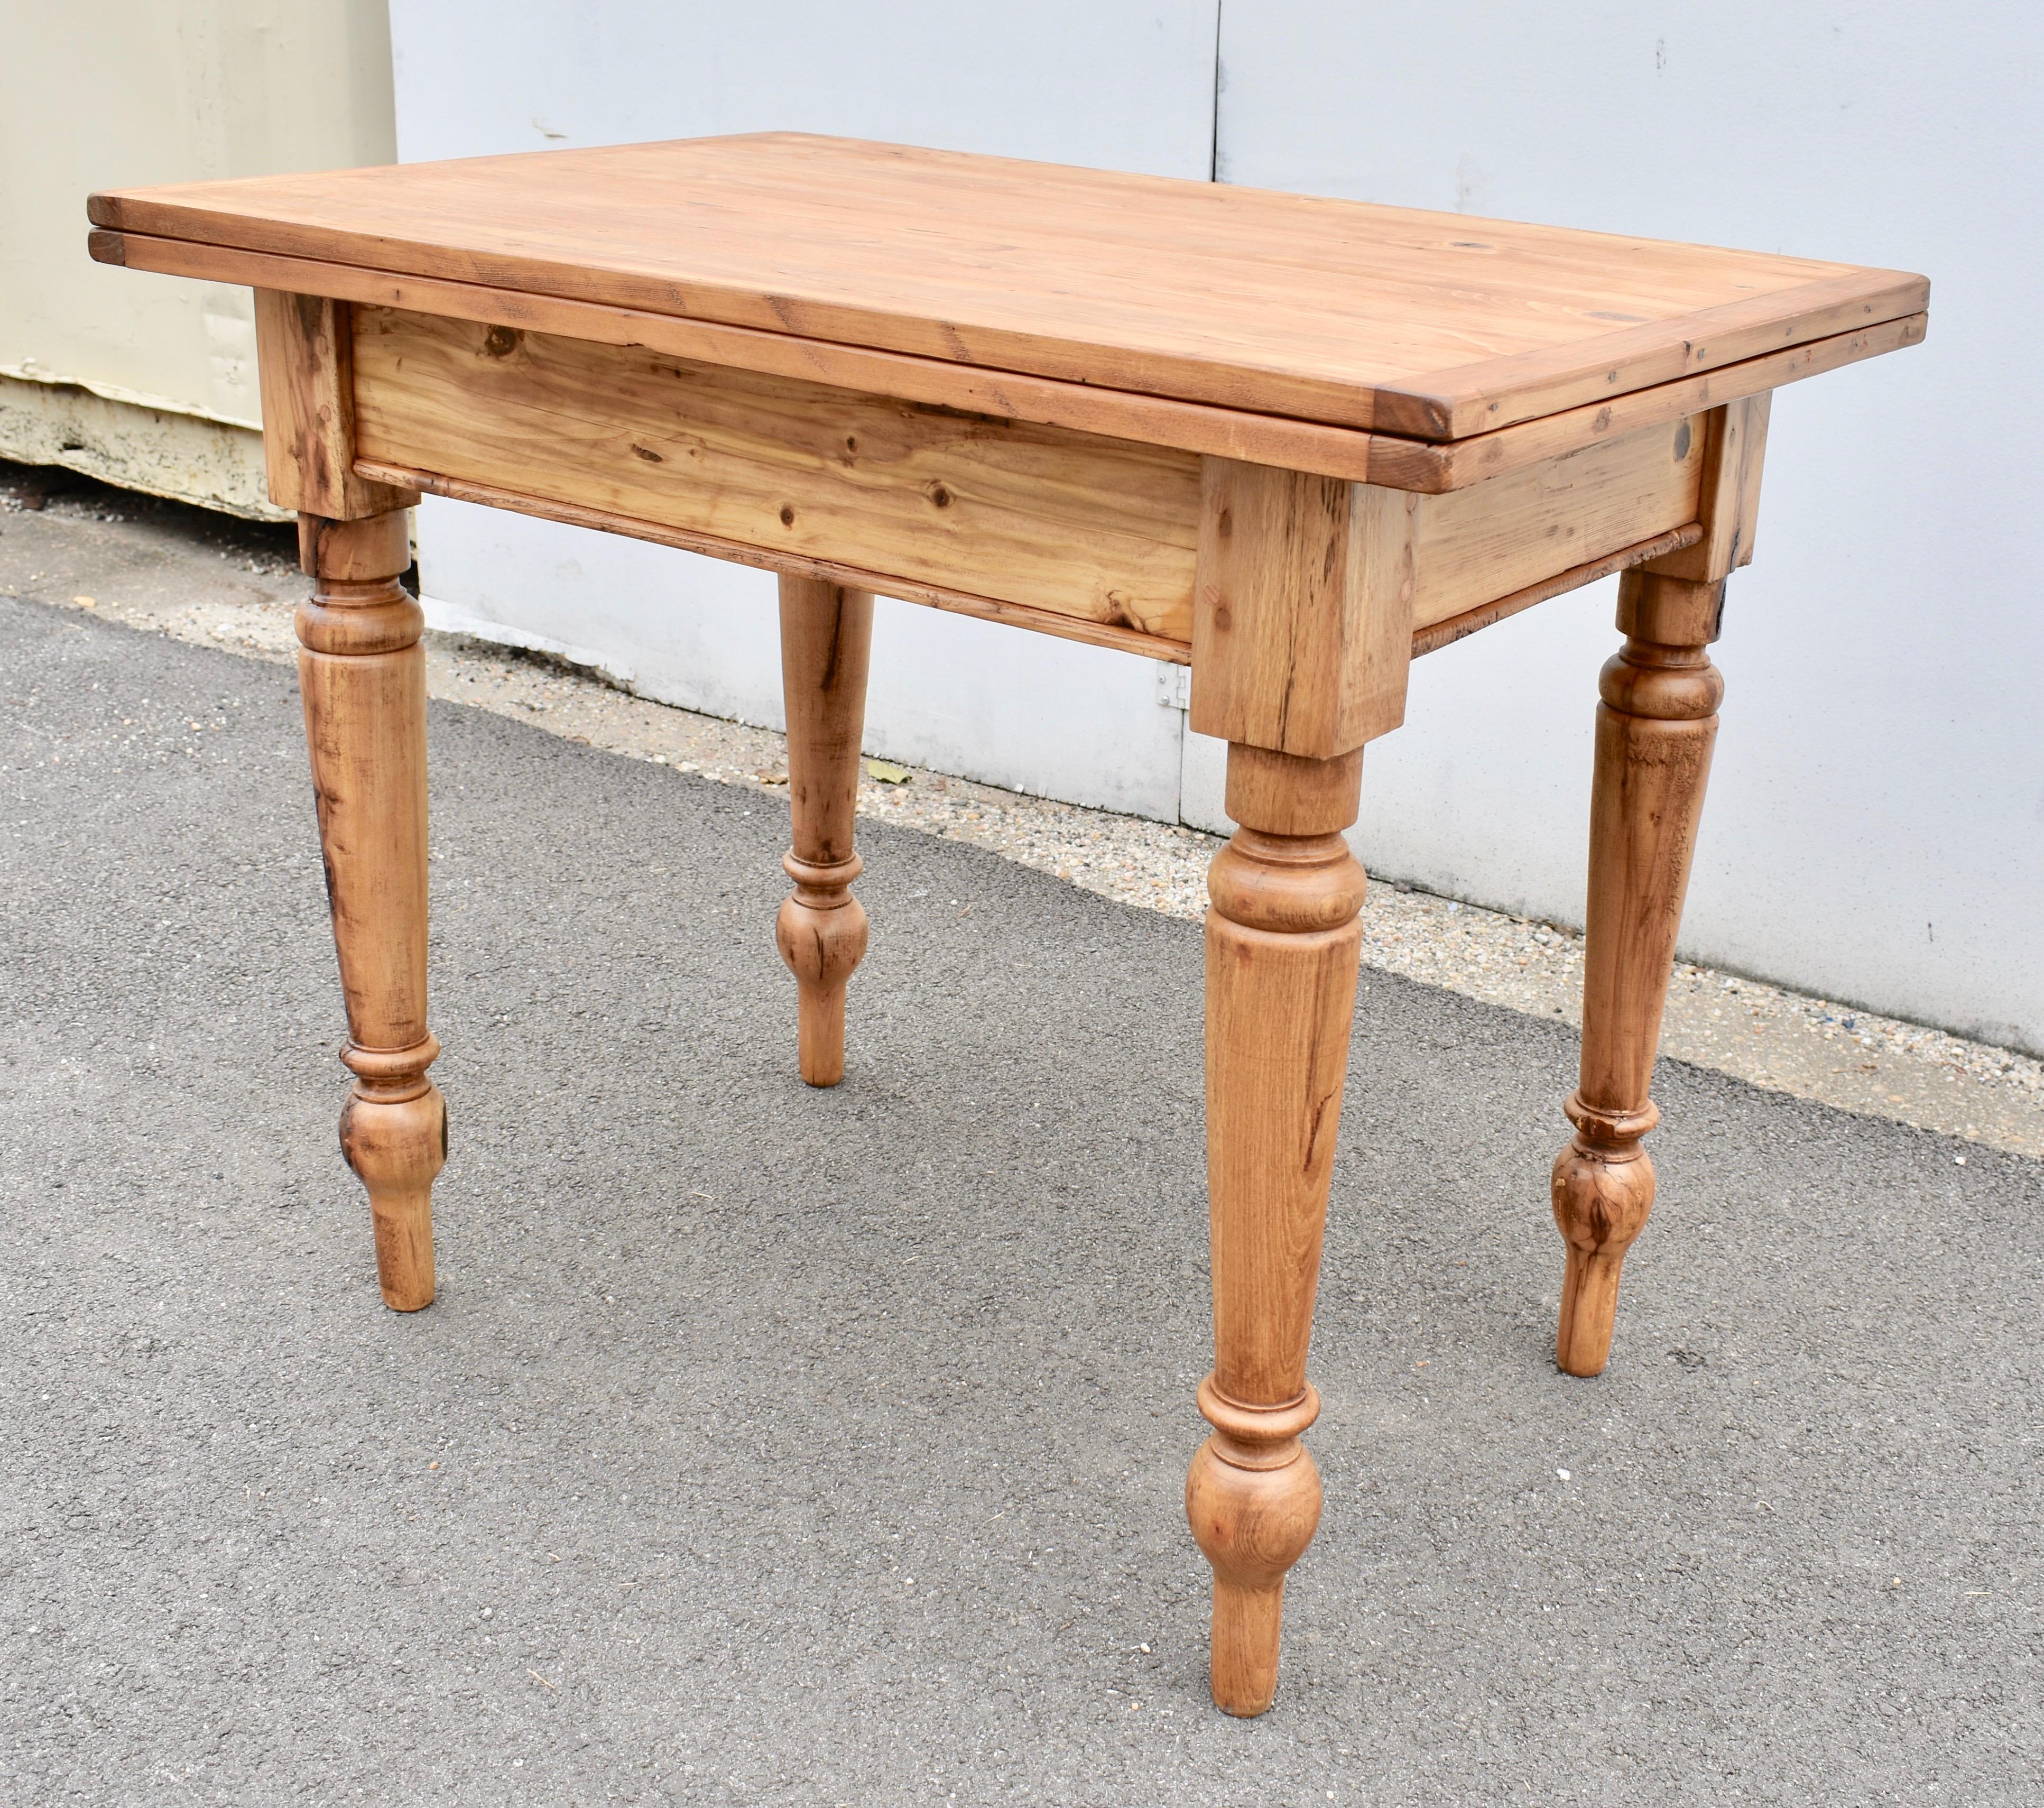 Hungarian Pine Turned Leg Swivel-Top Table For Sale